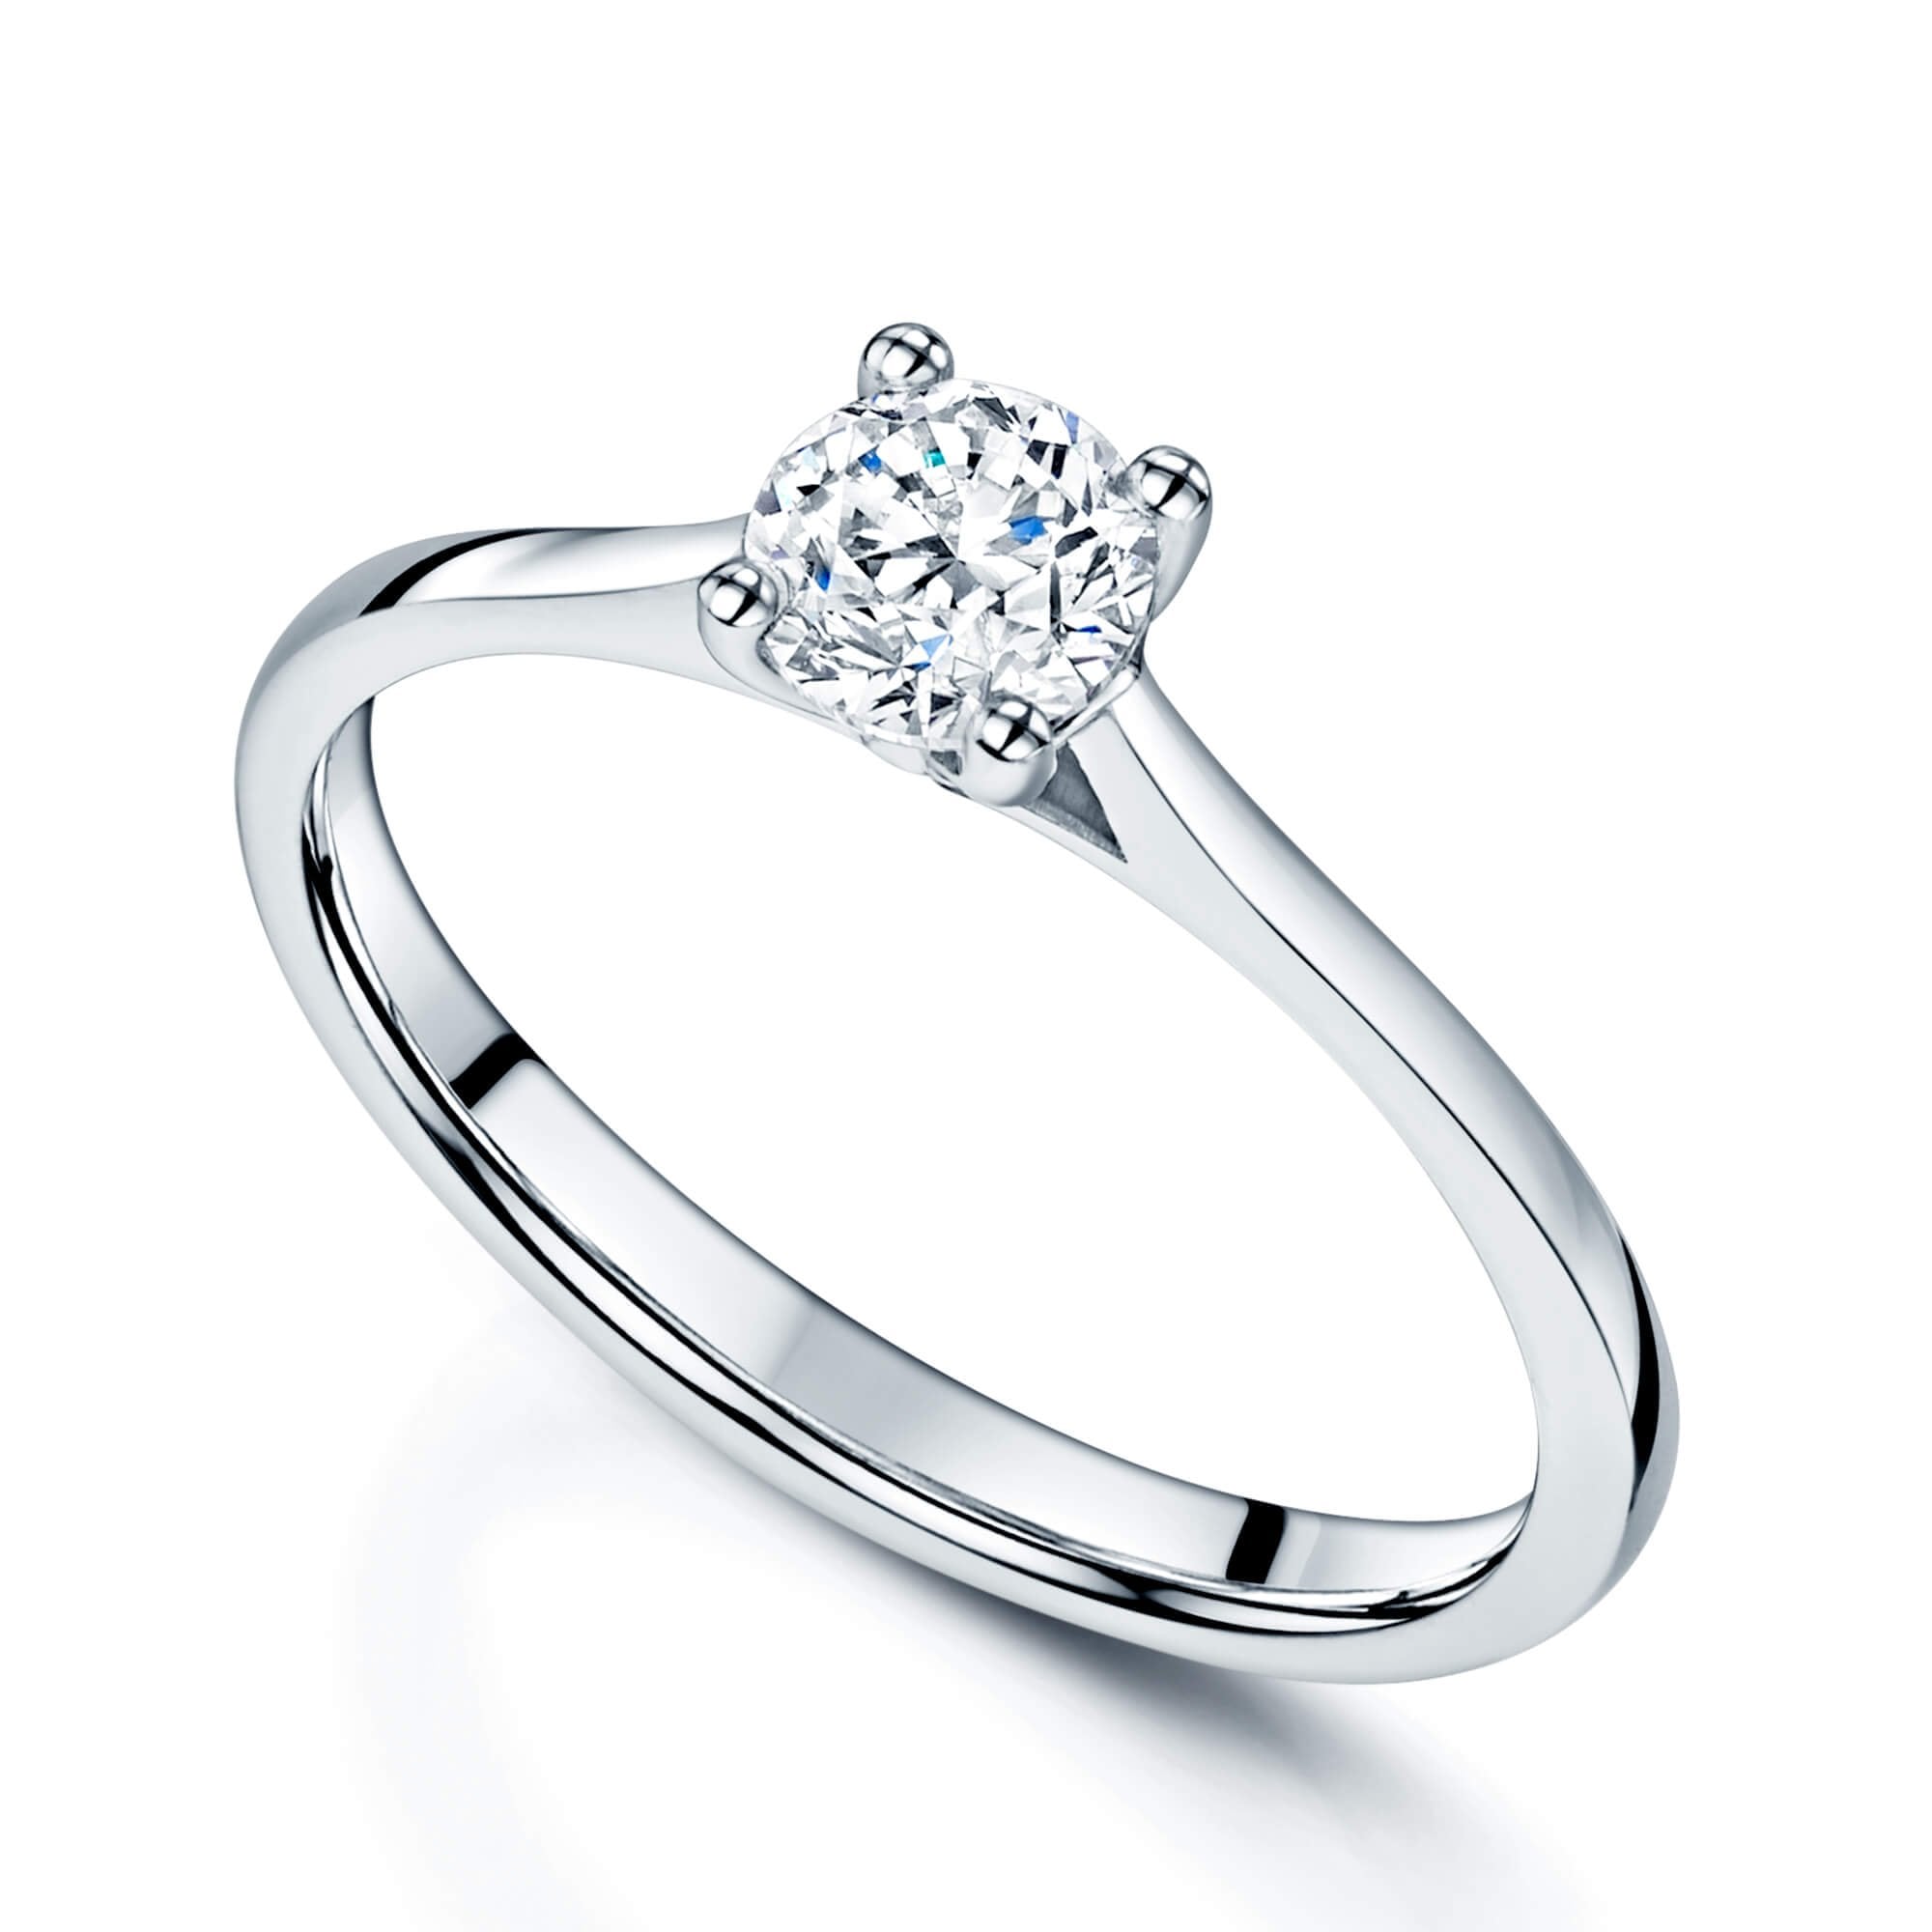 Simply Solitaire Collection Platinum Set Diamond Solitaire Engagement Ring GIA Certified 0.50 Carat